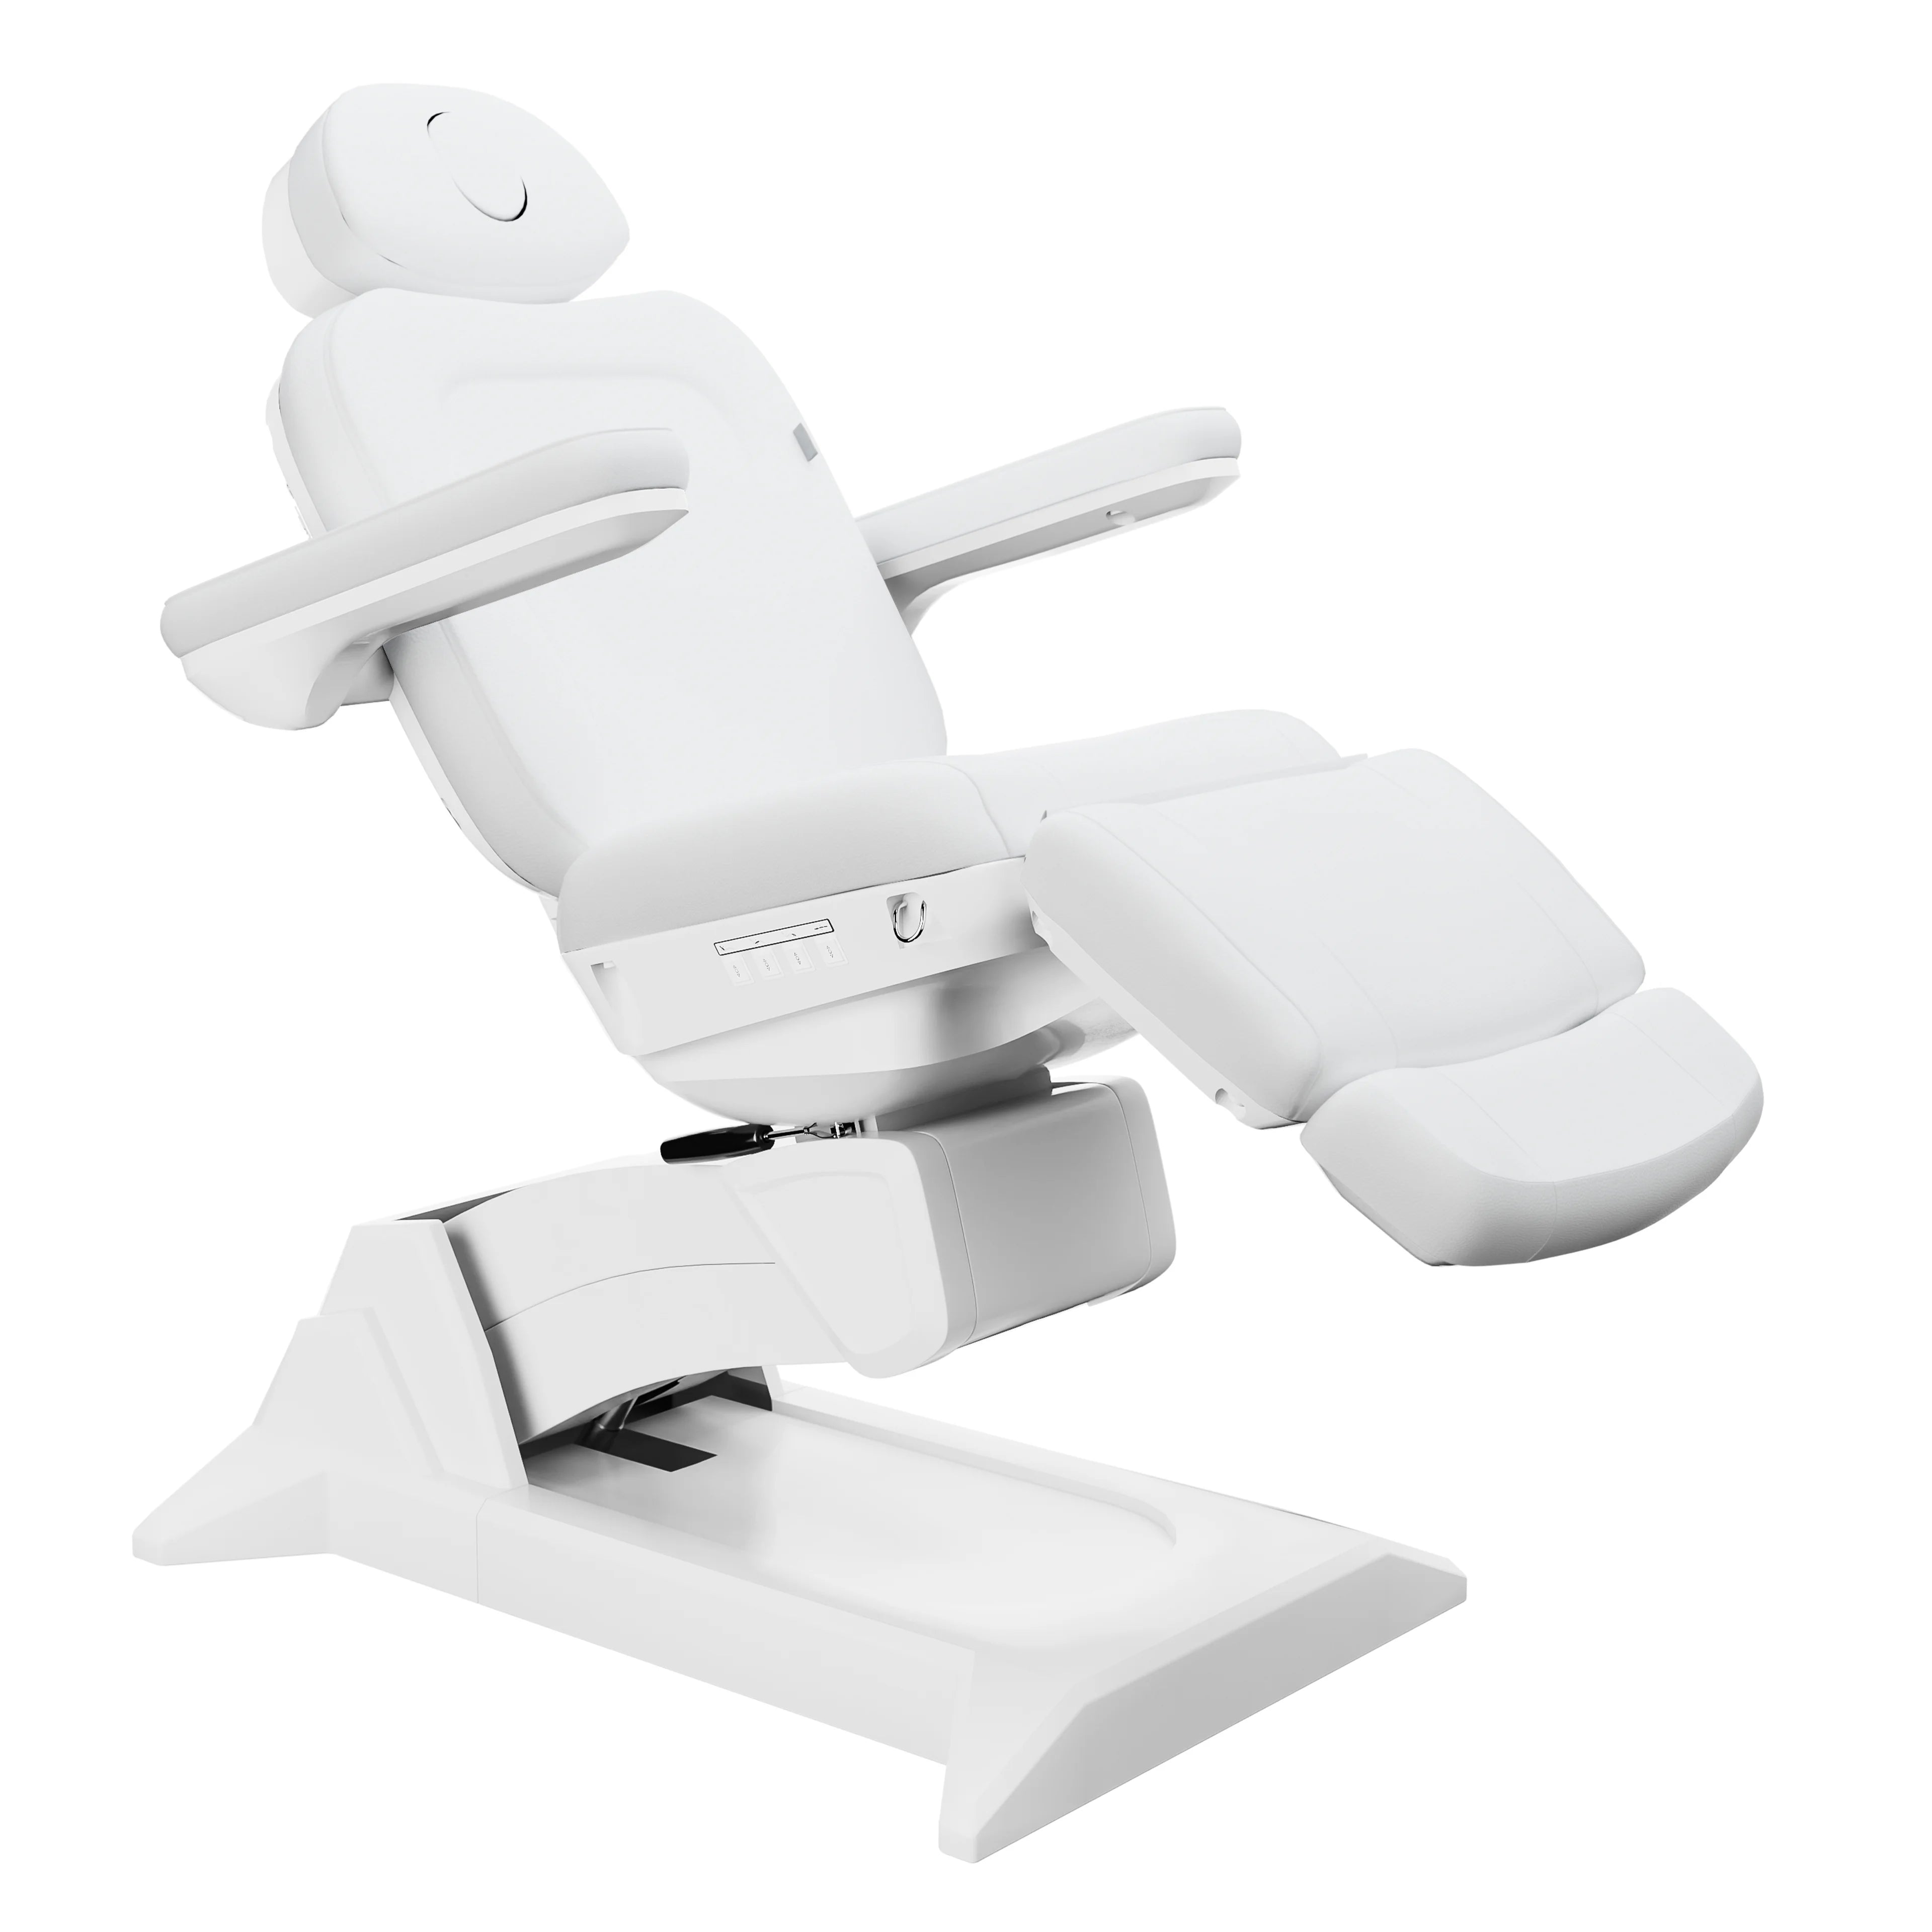 SpaMarc . Ultera (White) . Rotating . 4 Motor Spa Treatment Chair/Bed